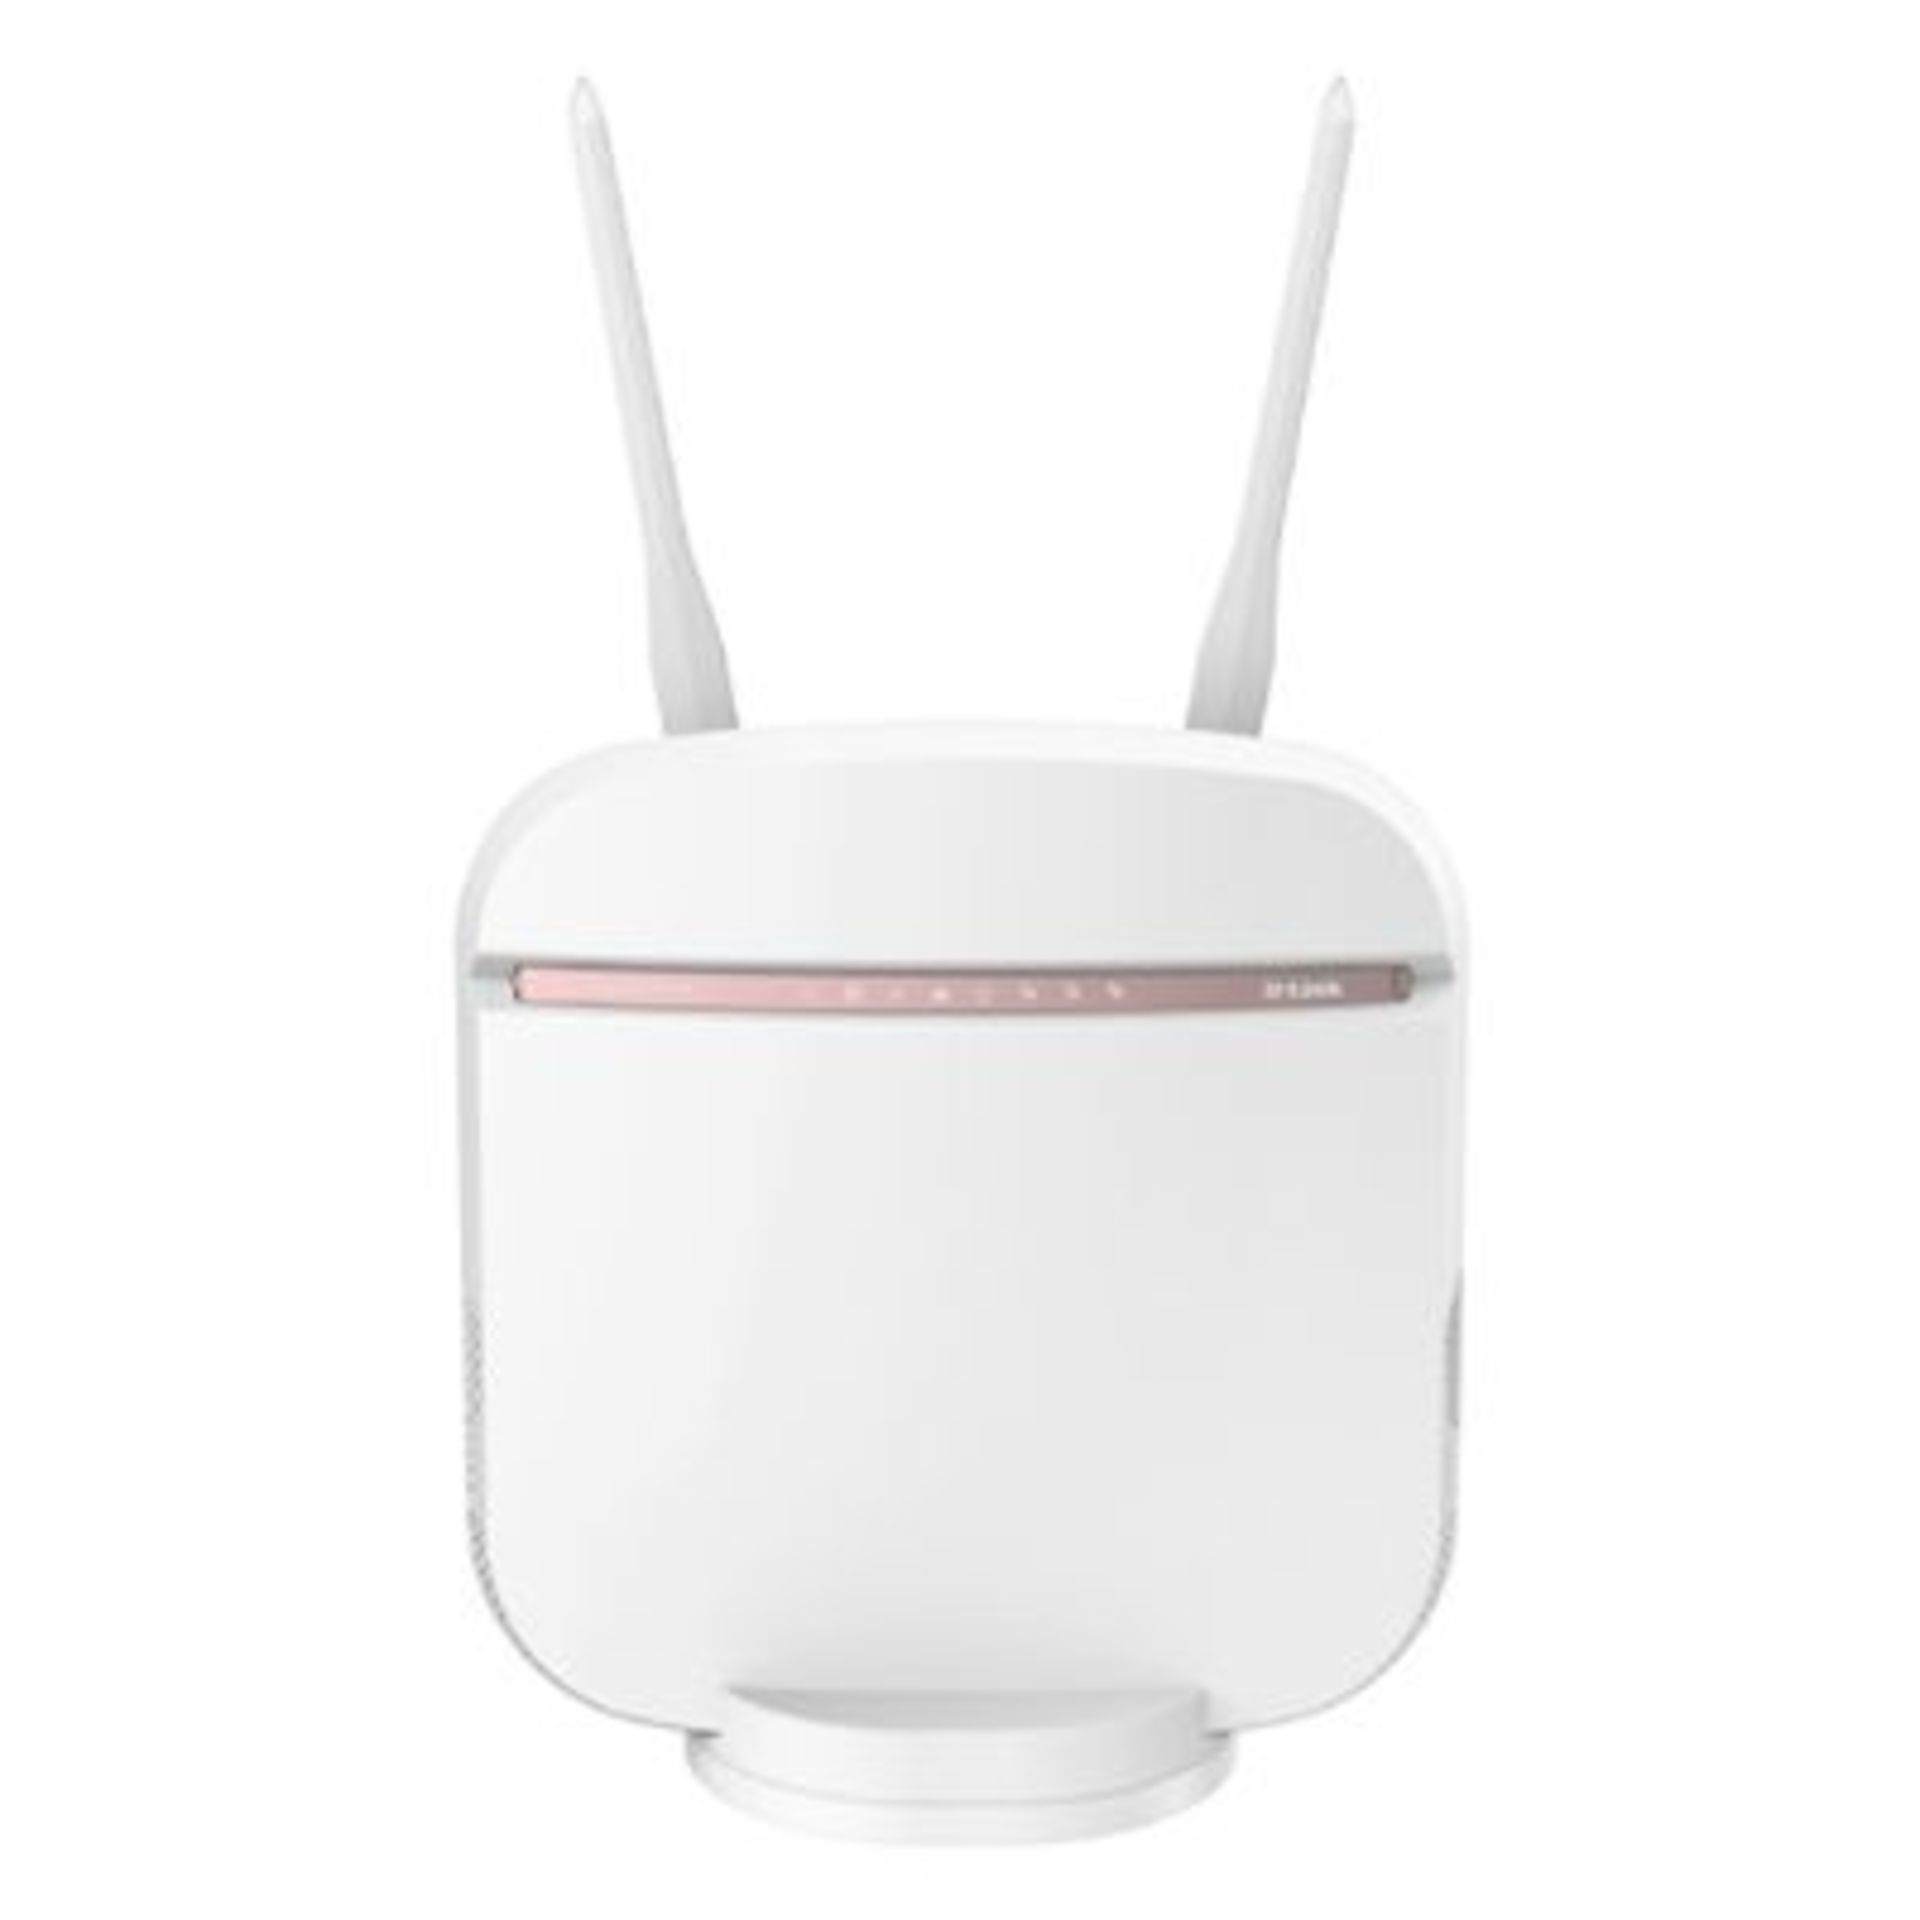 D-Link DWR-978 WiFi 5 4G/5G NR Router w/ Embedded SIM Slot (2.5Gbps AC). - P6. The D-Link DWR-978